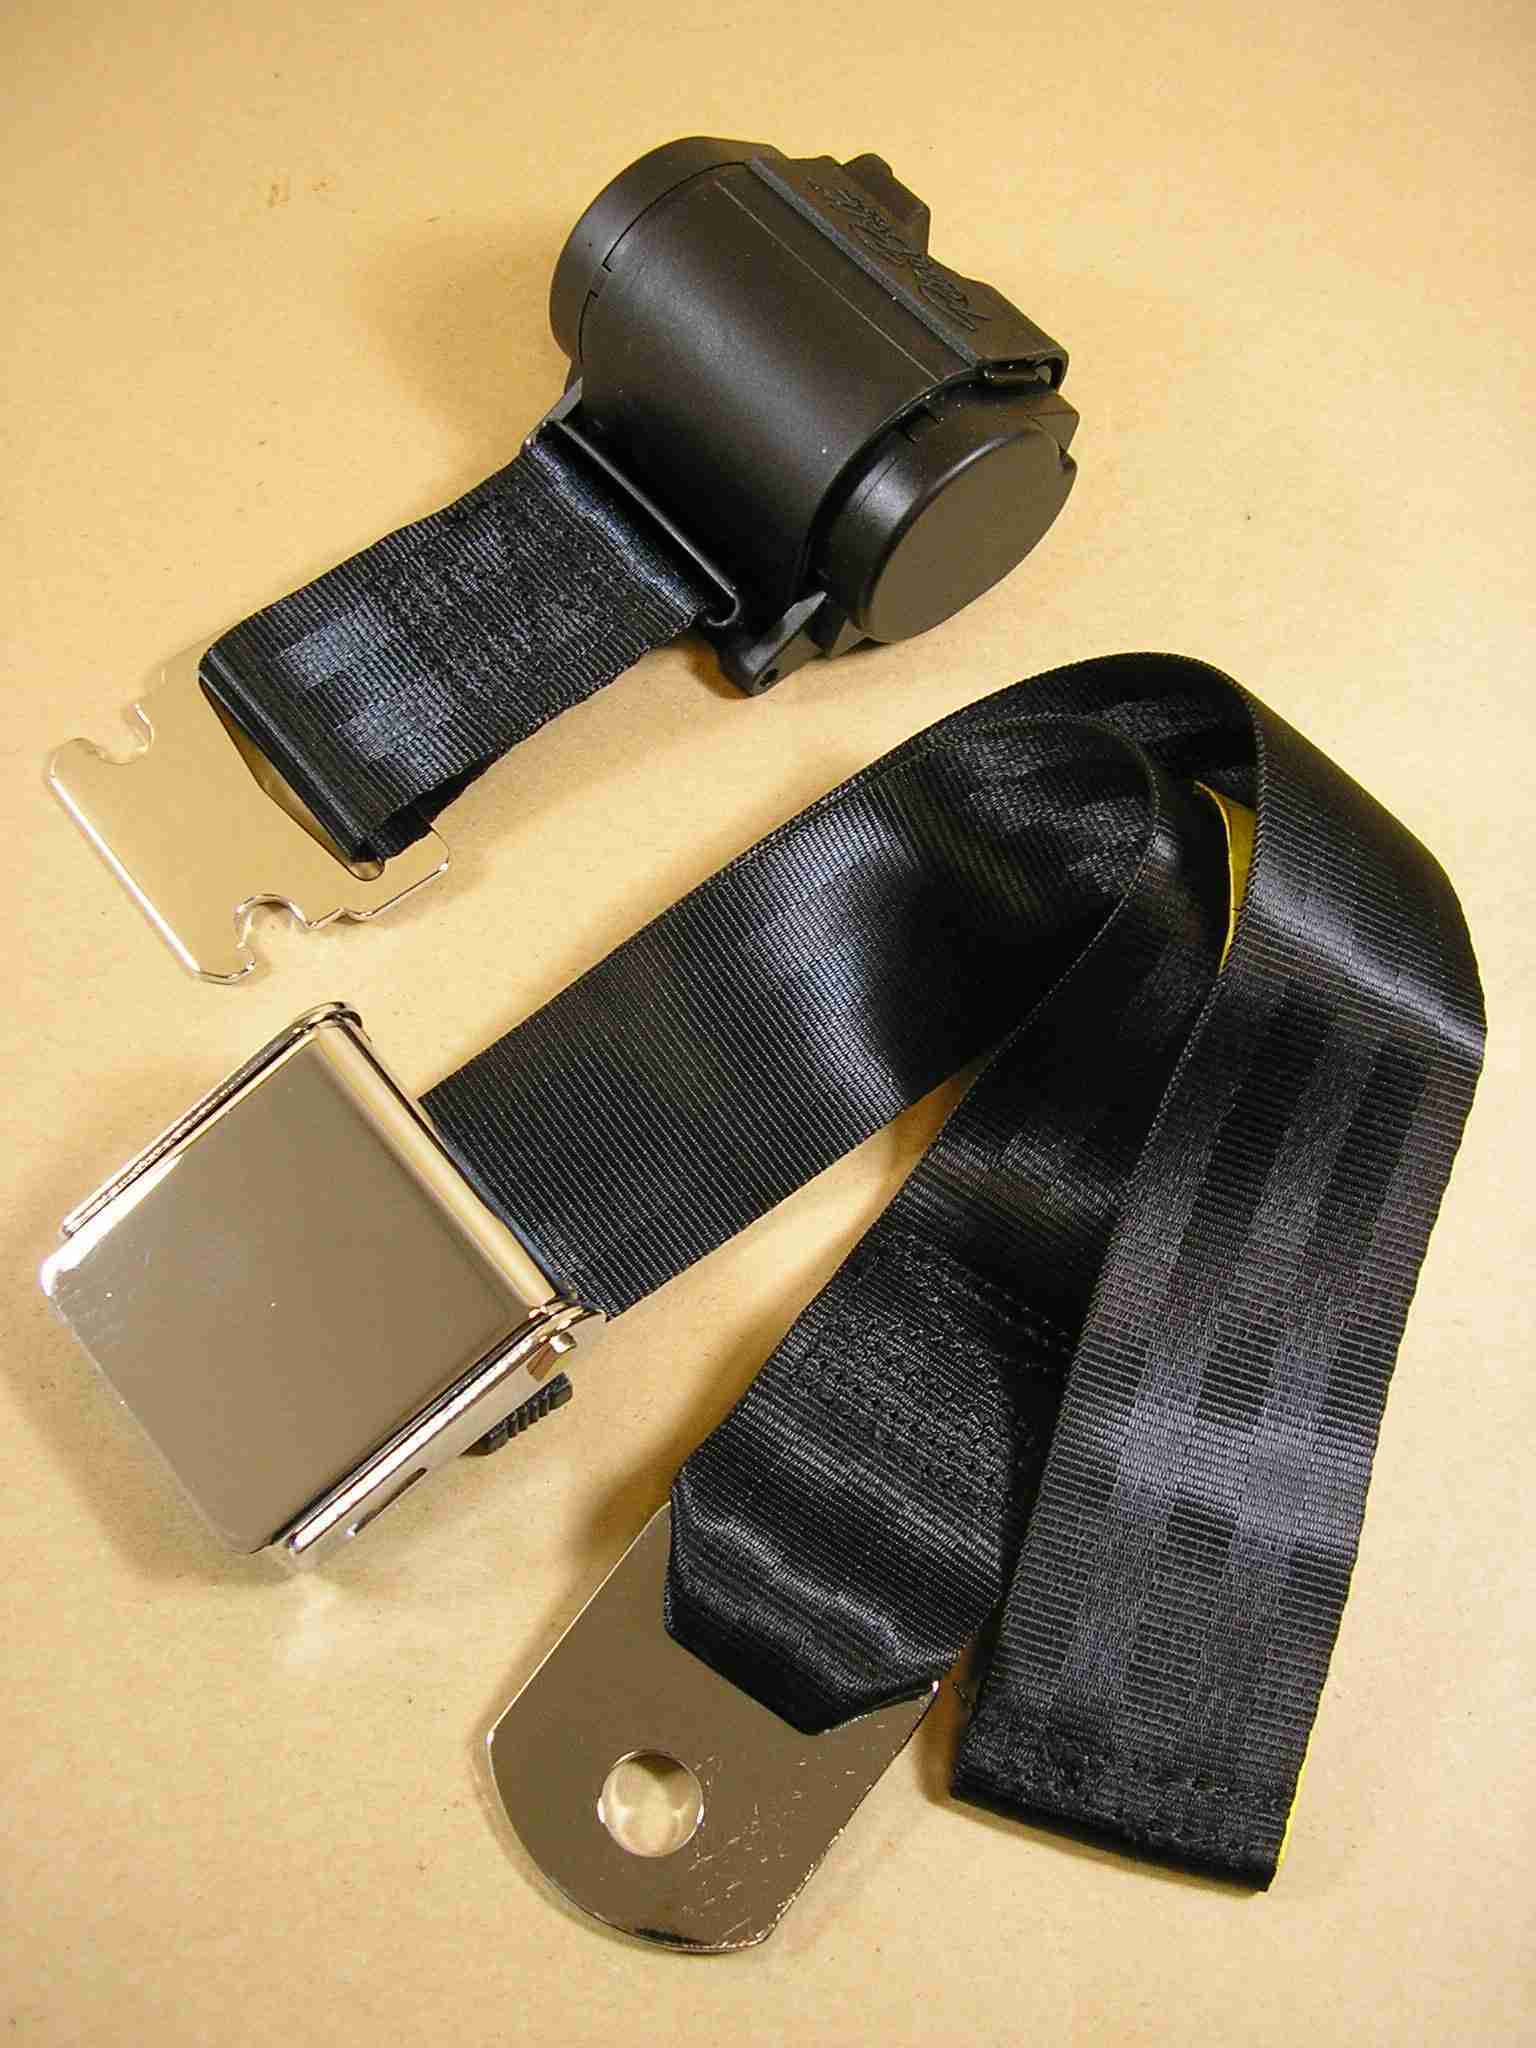 1926-74 2-Point Retractable Seat Belt w/ Chrome Aircraft-Style Buckle, come w/ hardware, specify color: black or sand